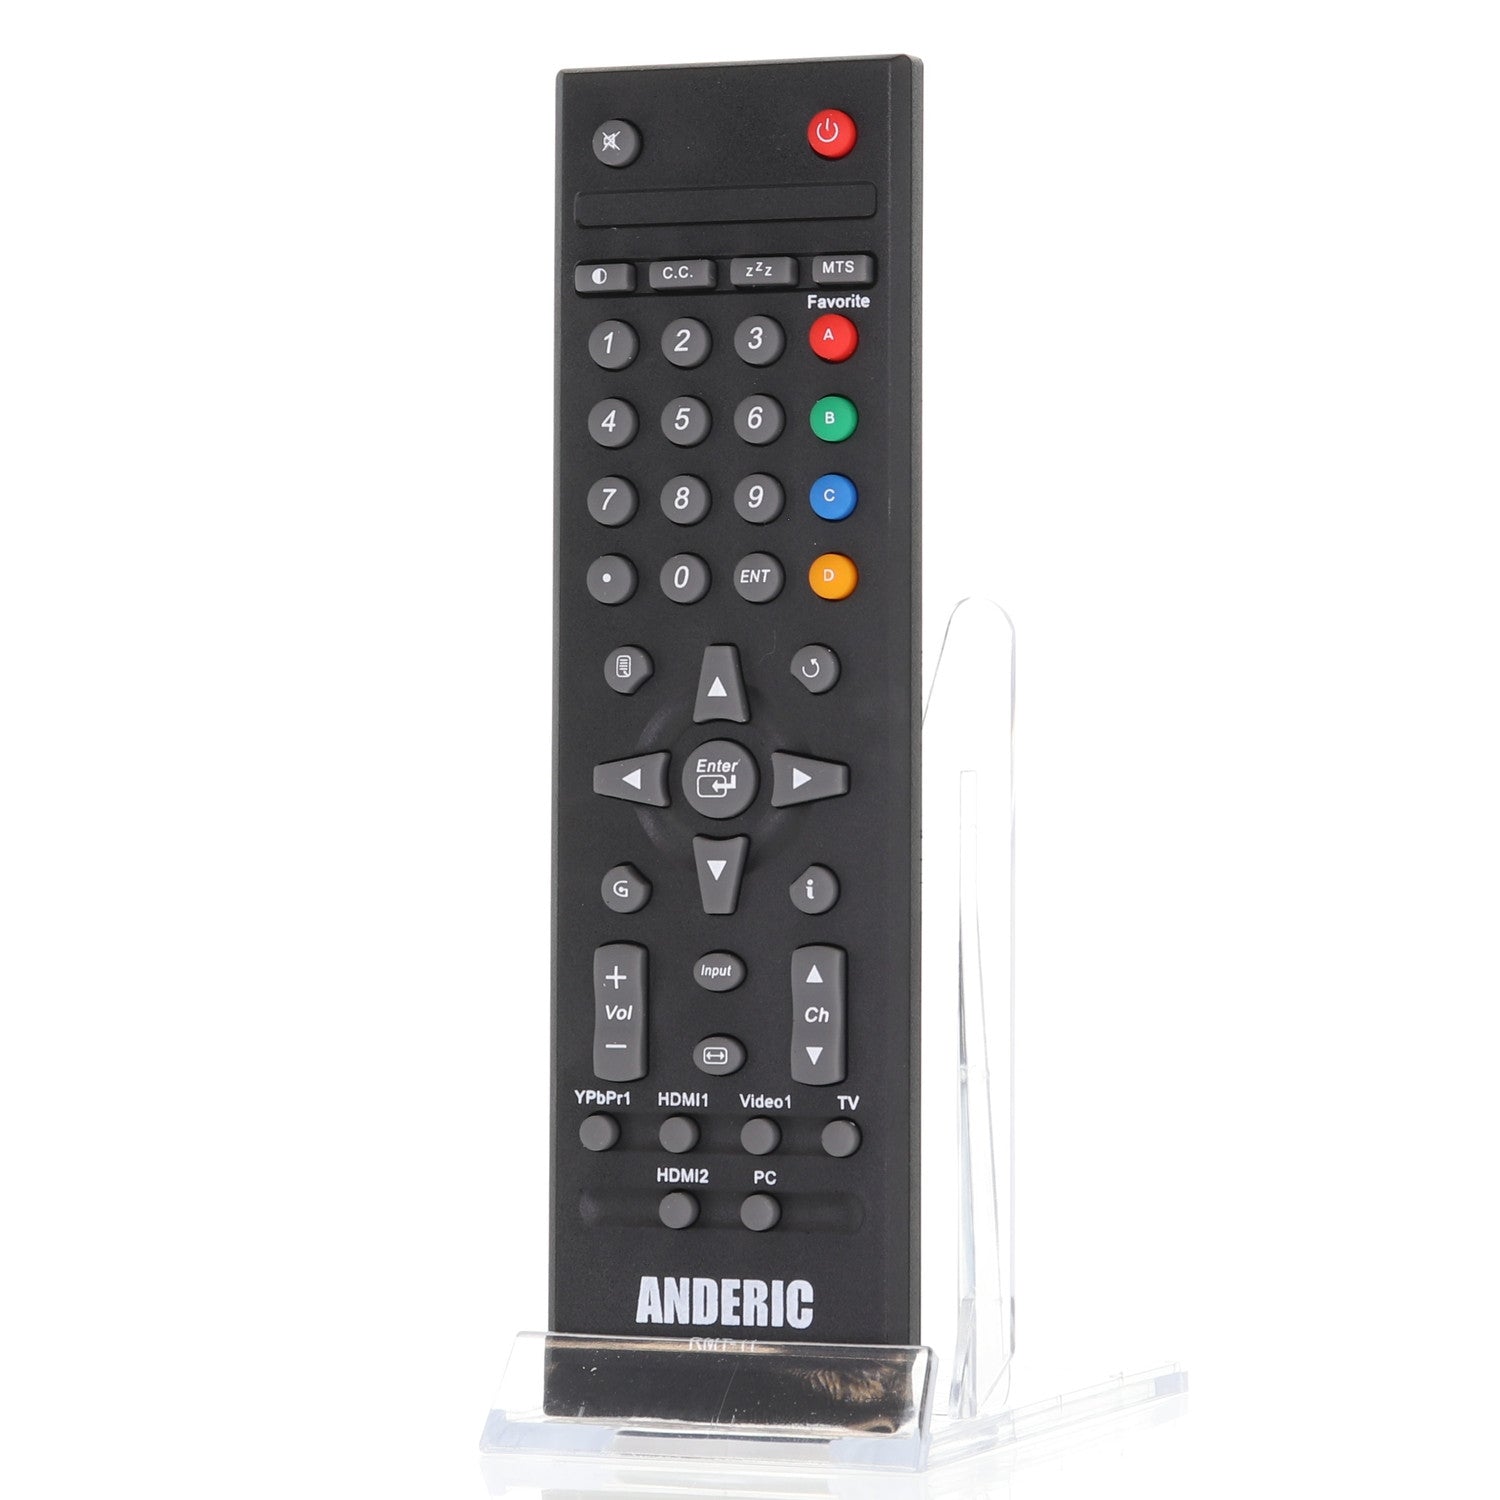 RMT11 Remote Control for Westinghouse® TVs